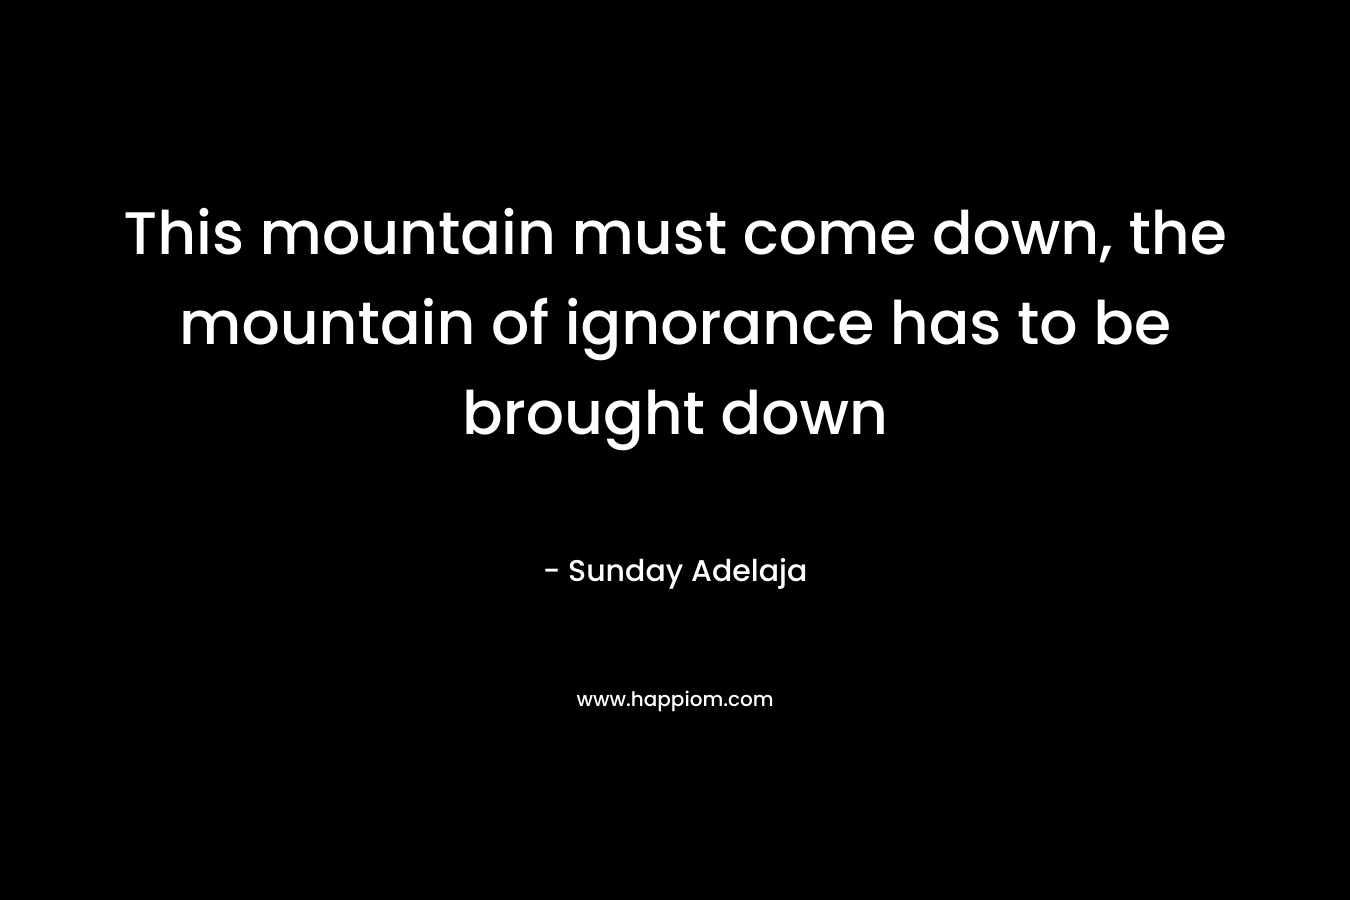 This mountain must come down, the mountain of ignorance has to be brought down